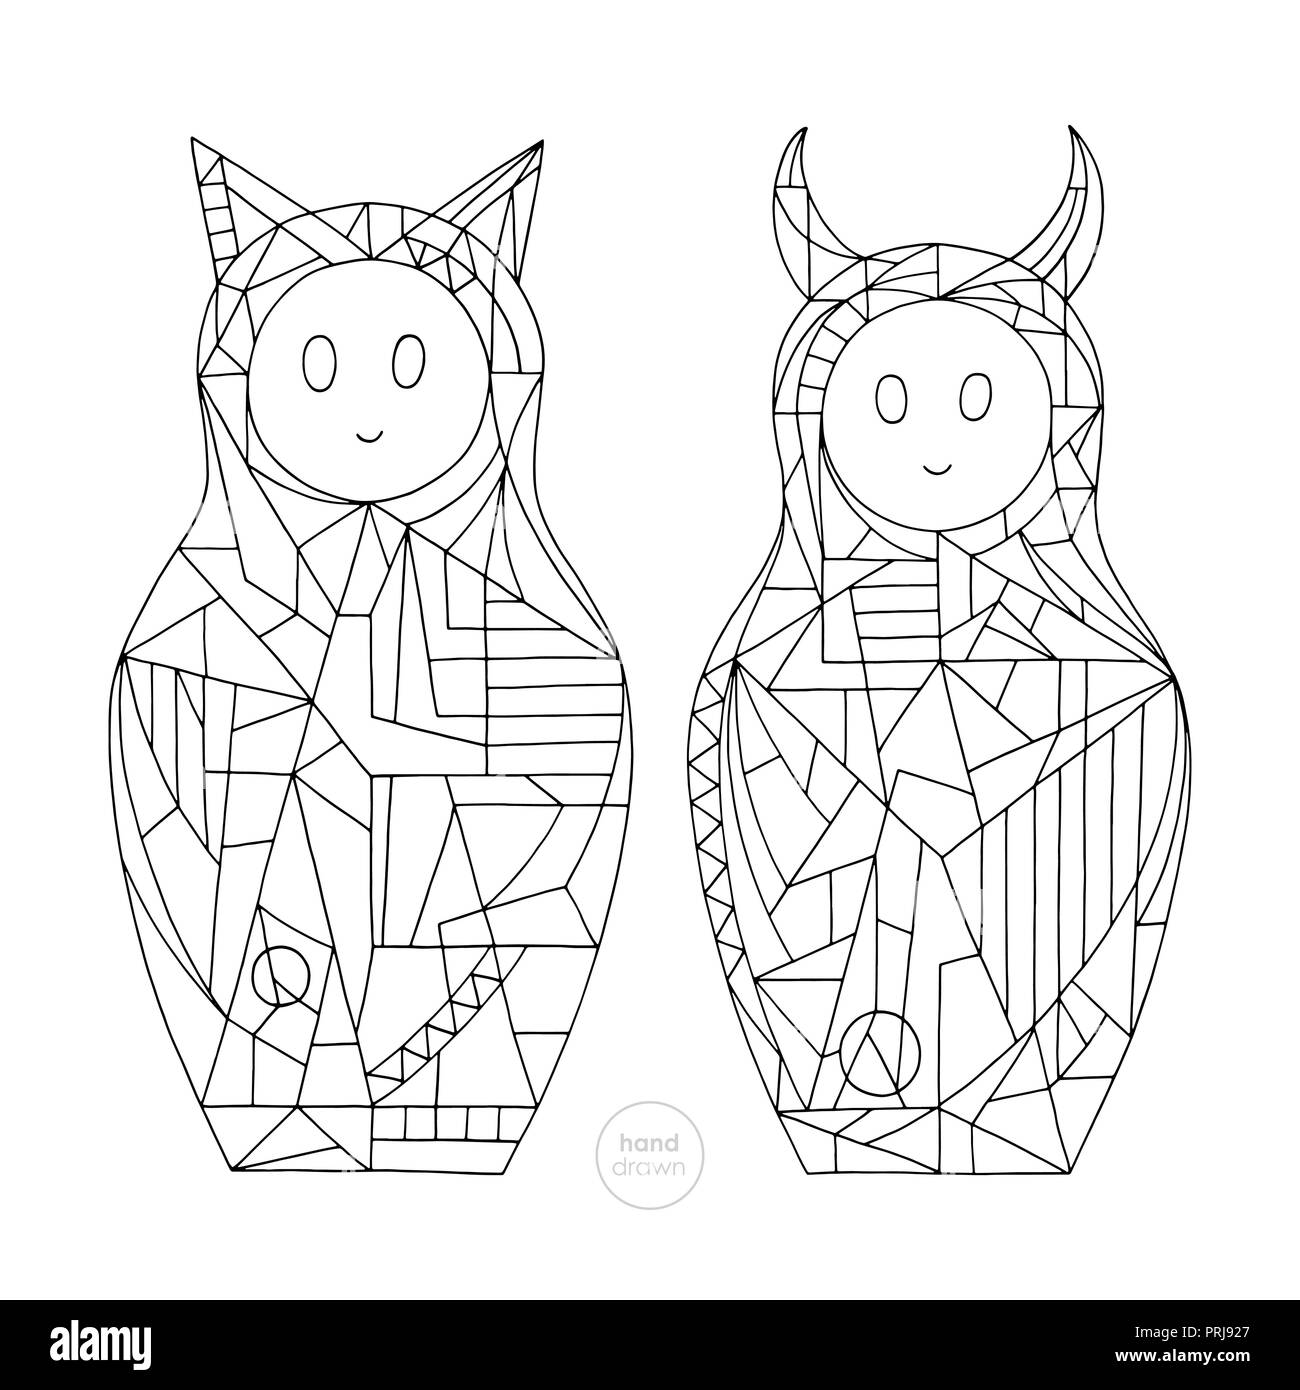 Abstract girls coloring pages. Hand drawn cat and devil characters vector illustration. Stylized nesting doll outlines. Stock Vector